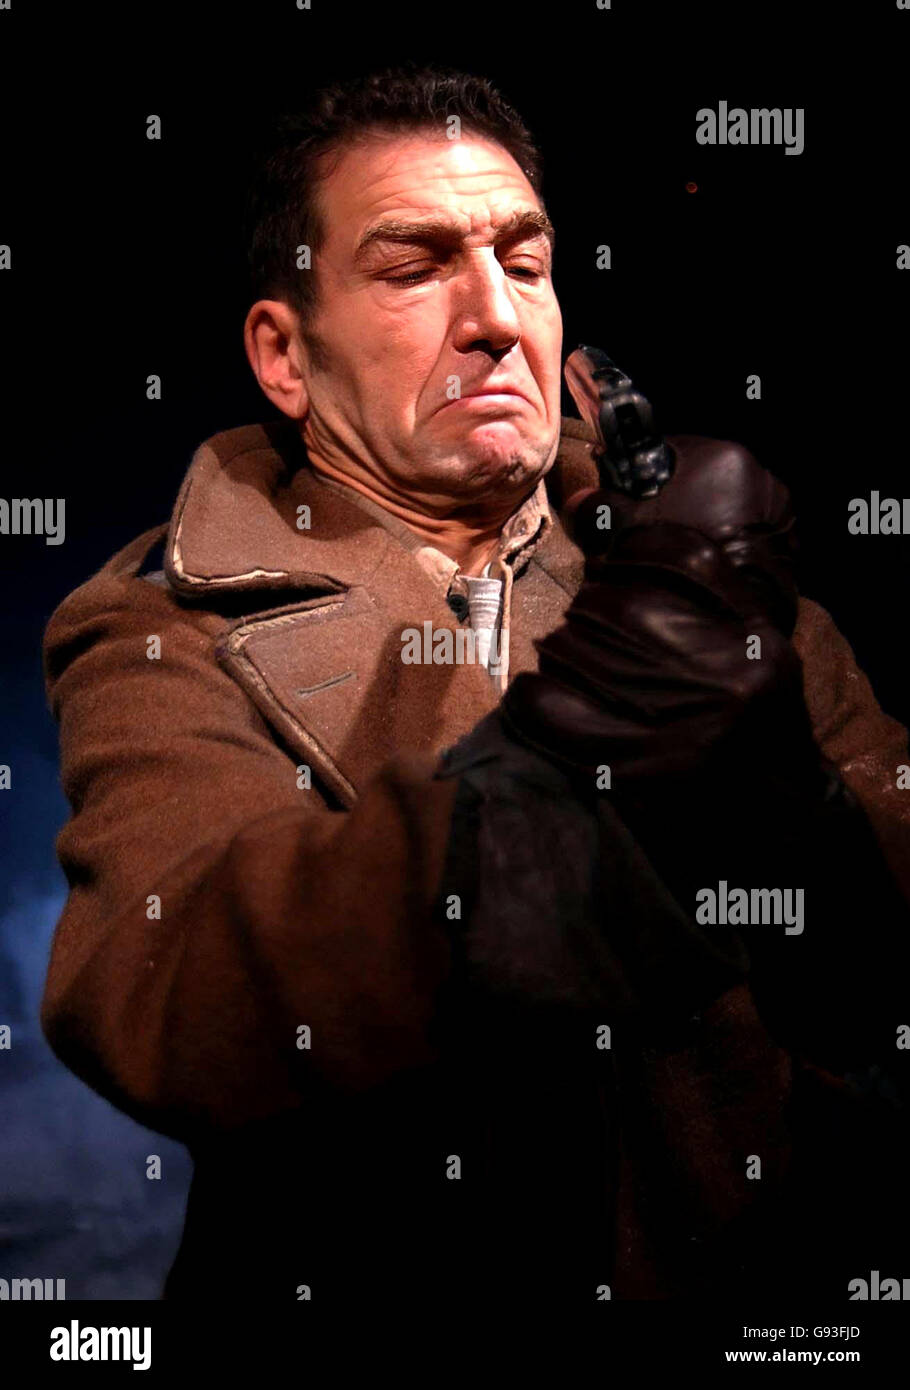 Actor Greg Hicks performs in 'Missing Persons, Four Tragedies and Roy Keane', a one-man play by Colin Teevan, at Trafalgar Studios, central London, Wednesday February 1 2006. PRESS ASSOCIATION PHOTO. Photo Credit Should Read: Joel Ryan/PA Stock Photo